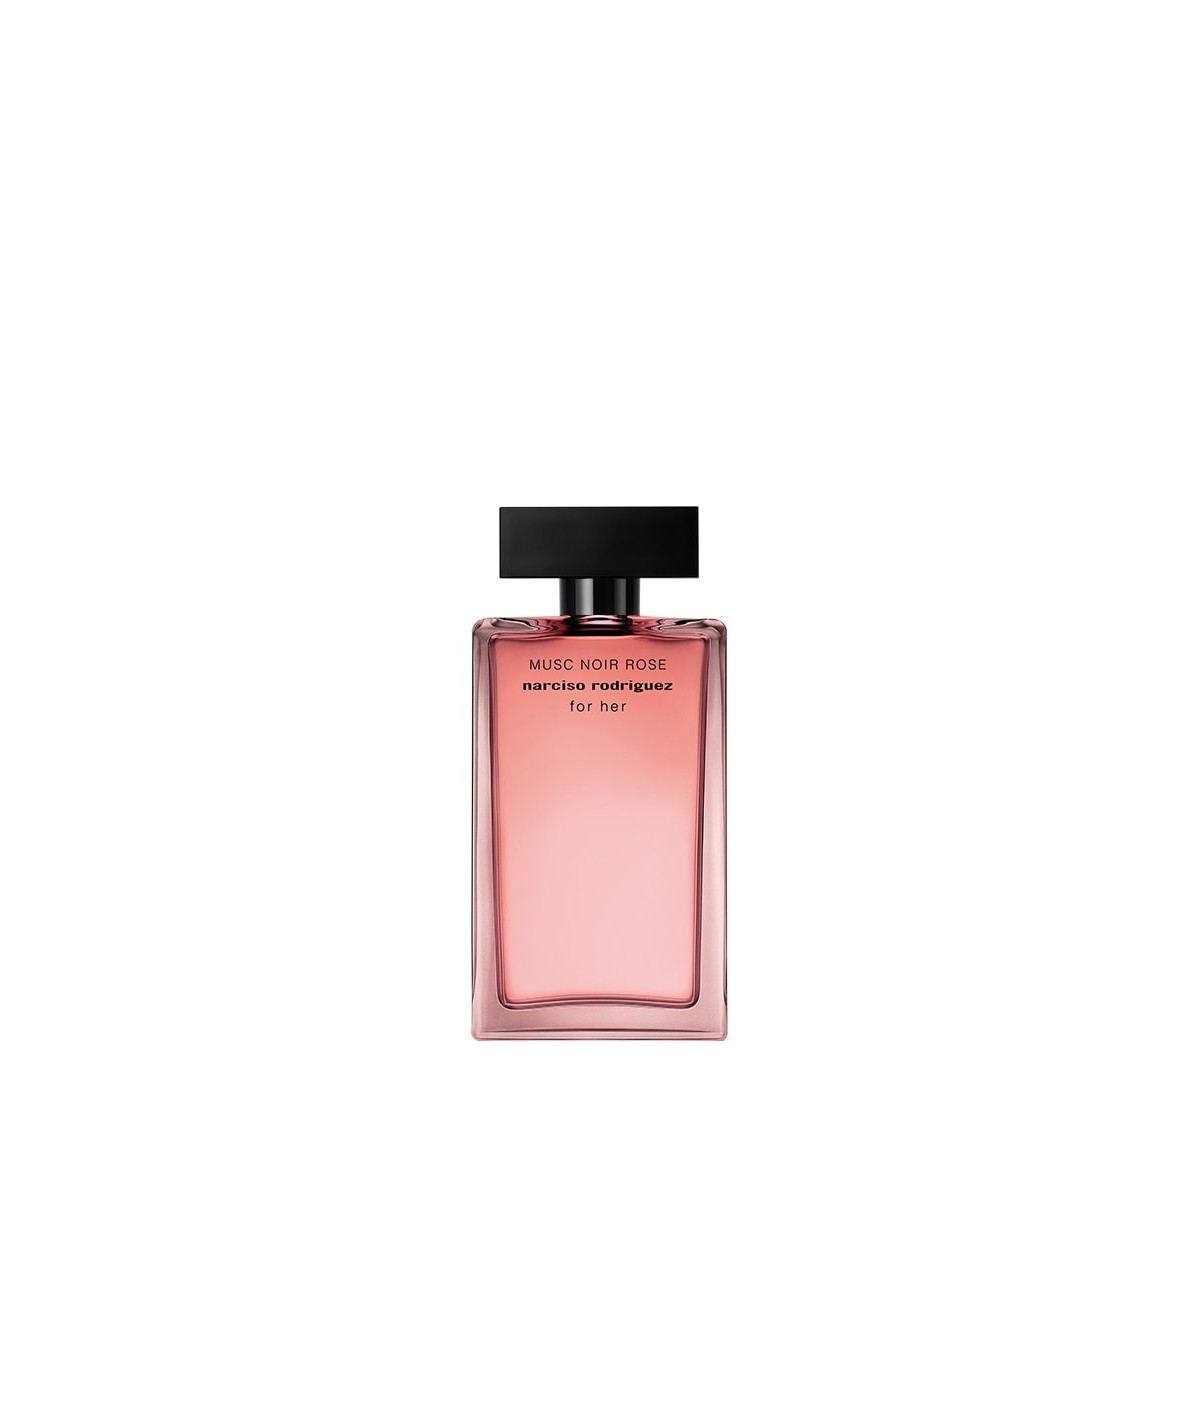 Narciso Rodriguez Musc Noir Rose for her EDP 100 ml. Narciso Rodriguez Rose Musk. Духи Роуз Ноире. Нарциссо Родригес Нуар Роуз Маск отзывы. Narciso rodriguez musc noir rose